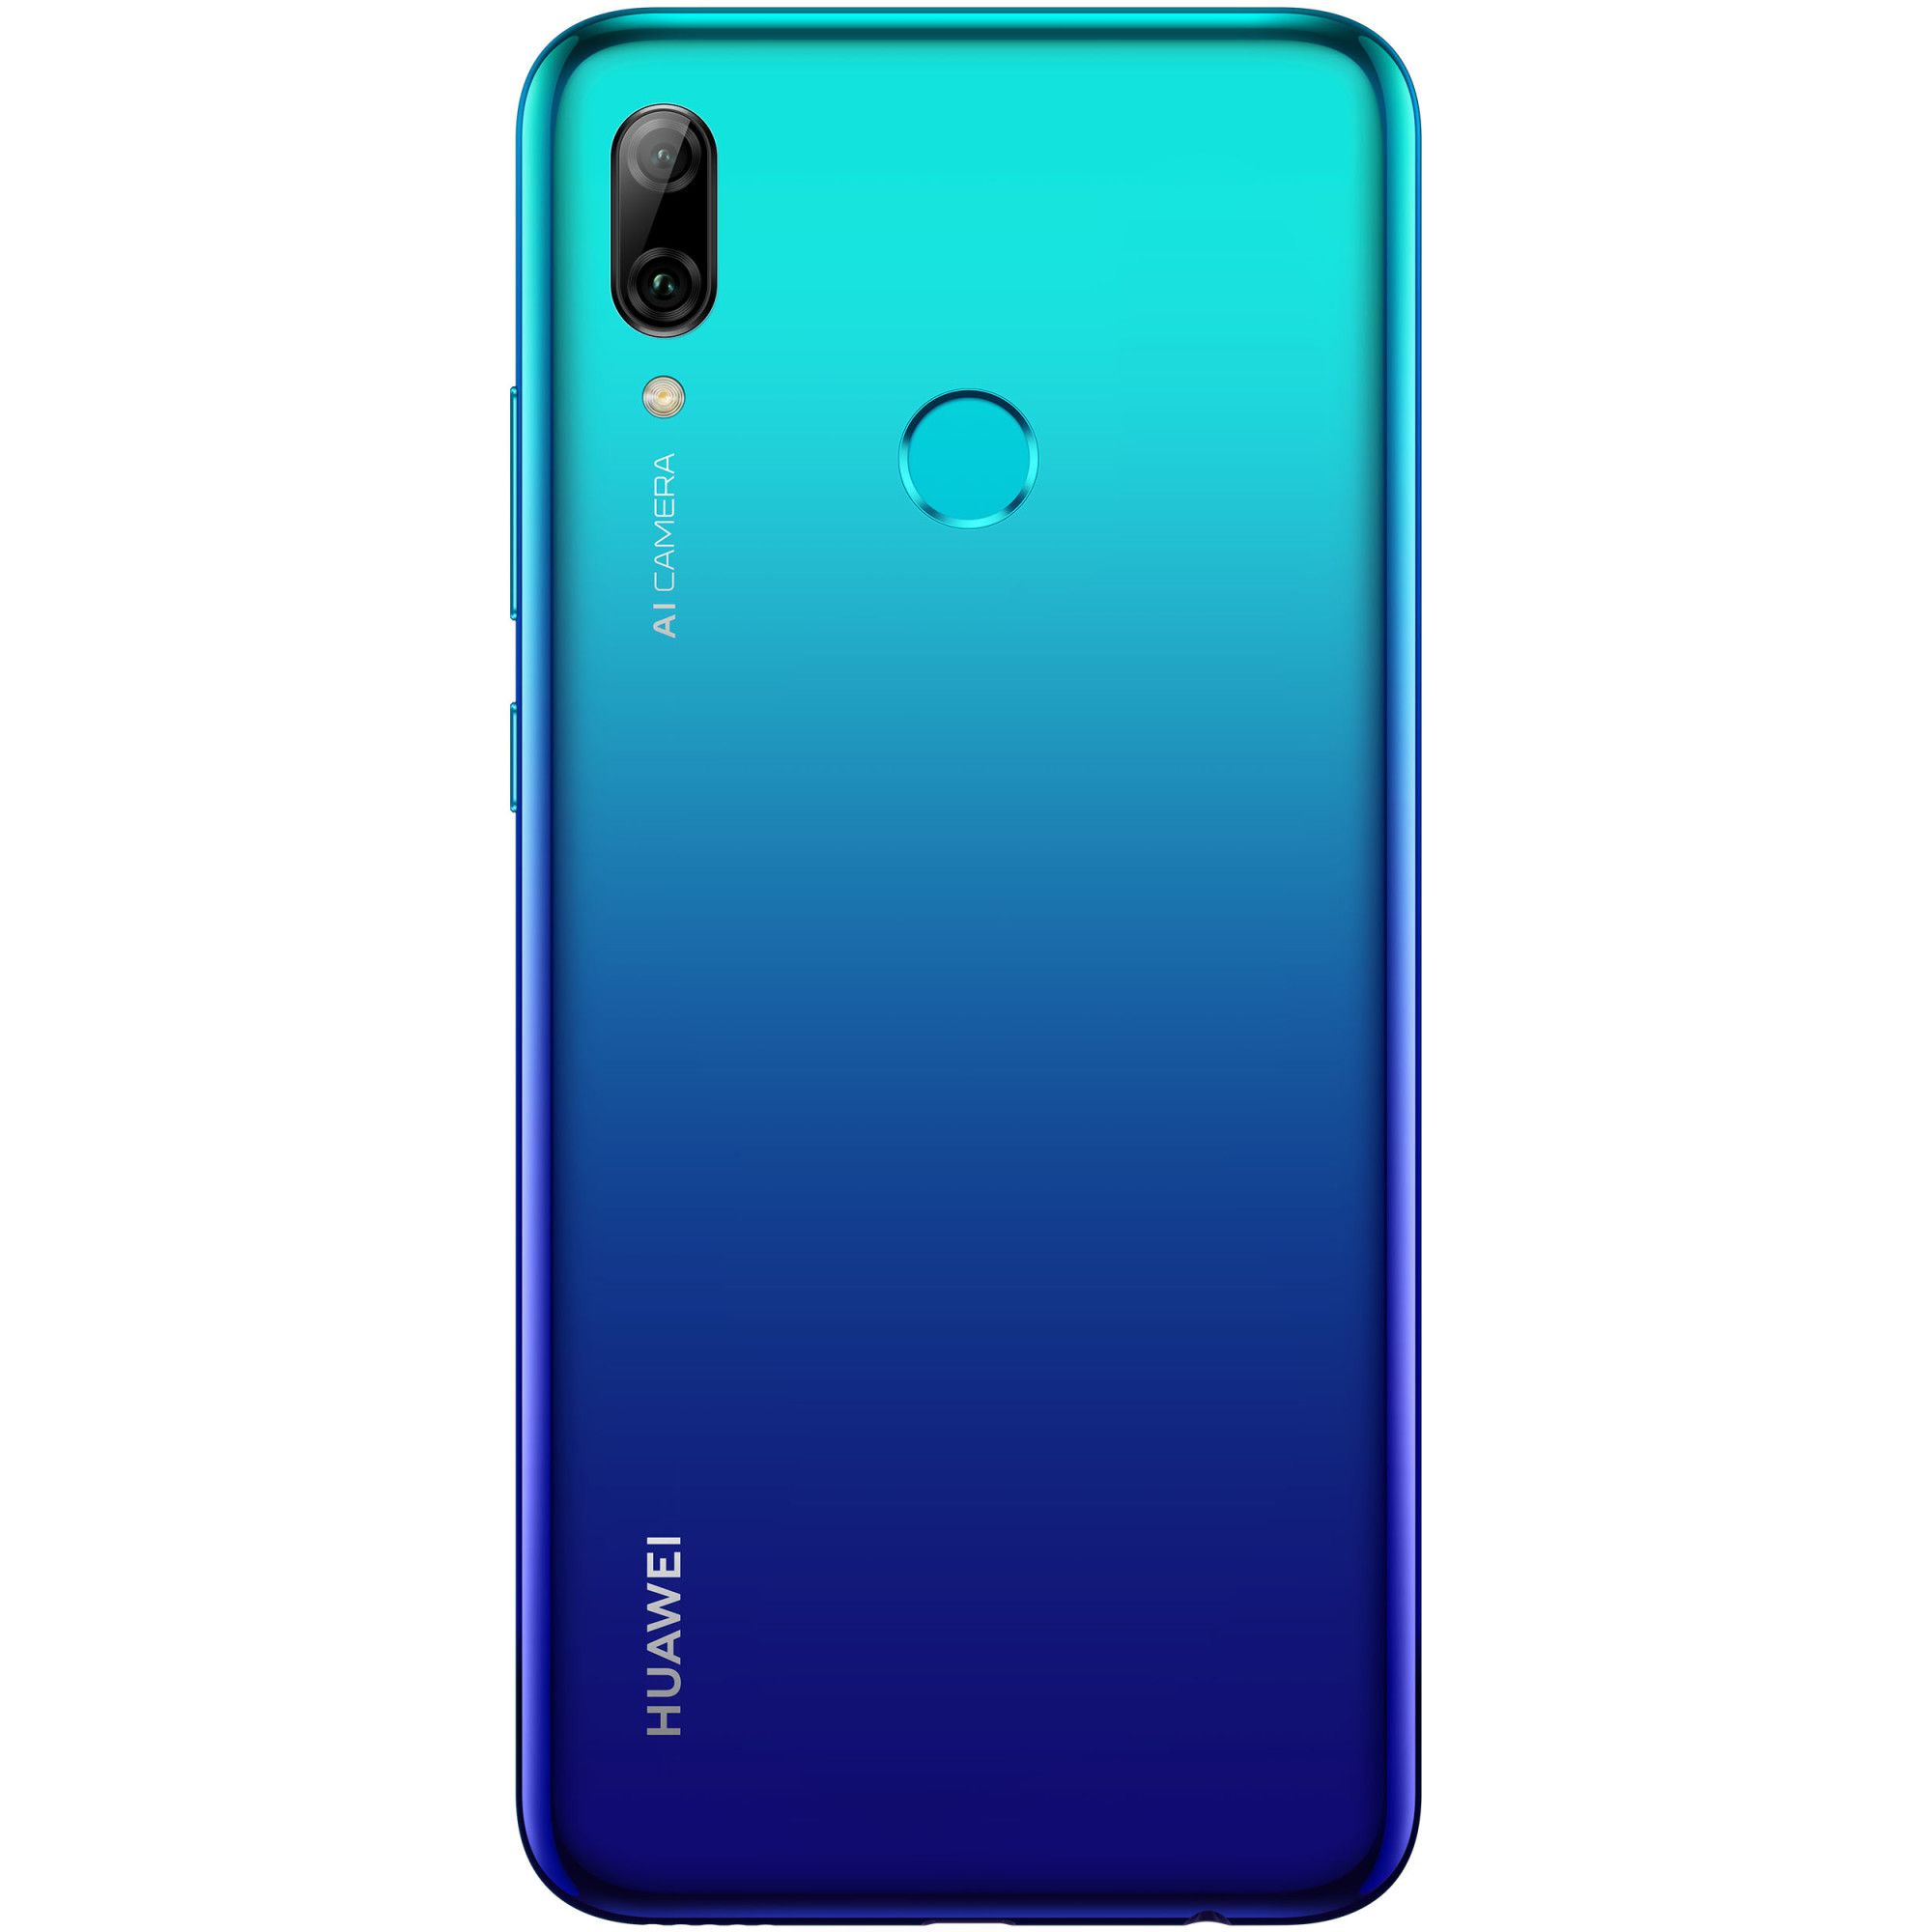 Huawei Smart 2019 specs, review, release date - PhonesData